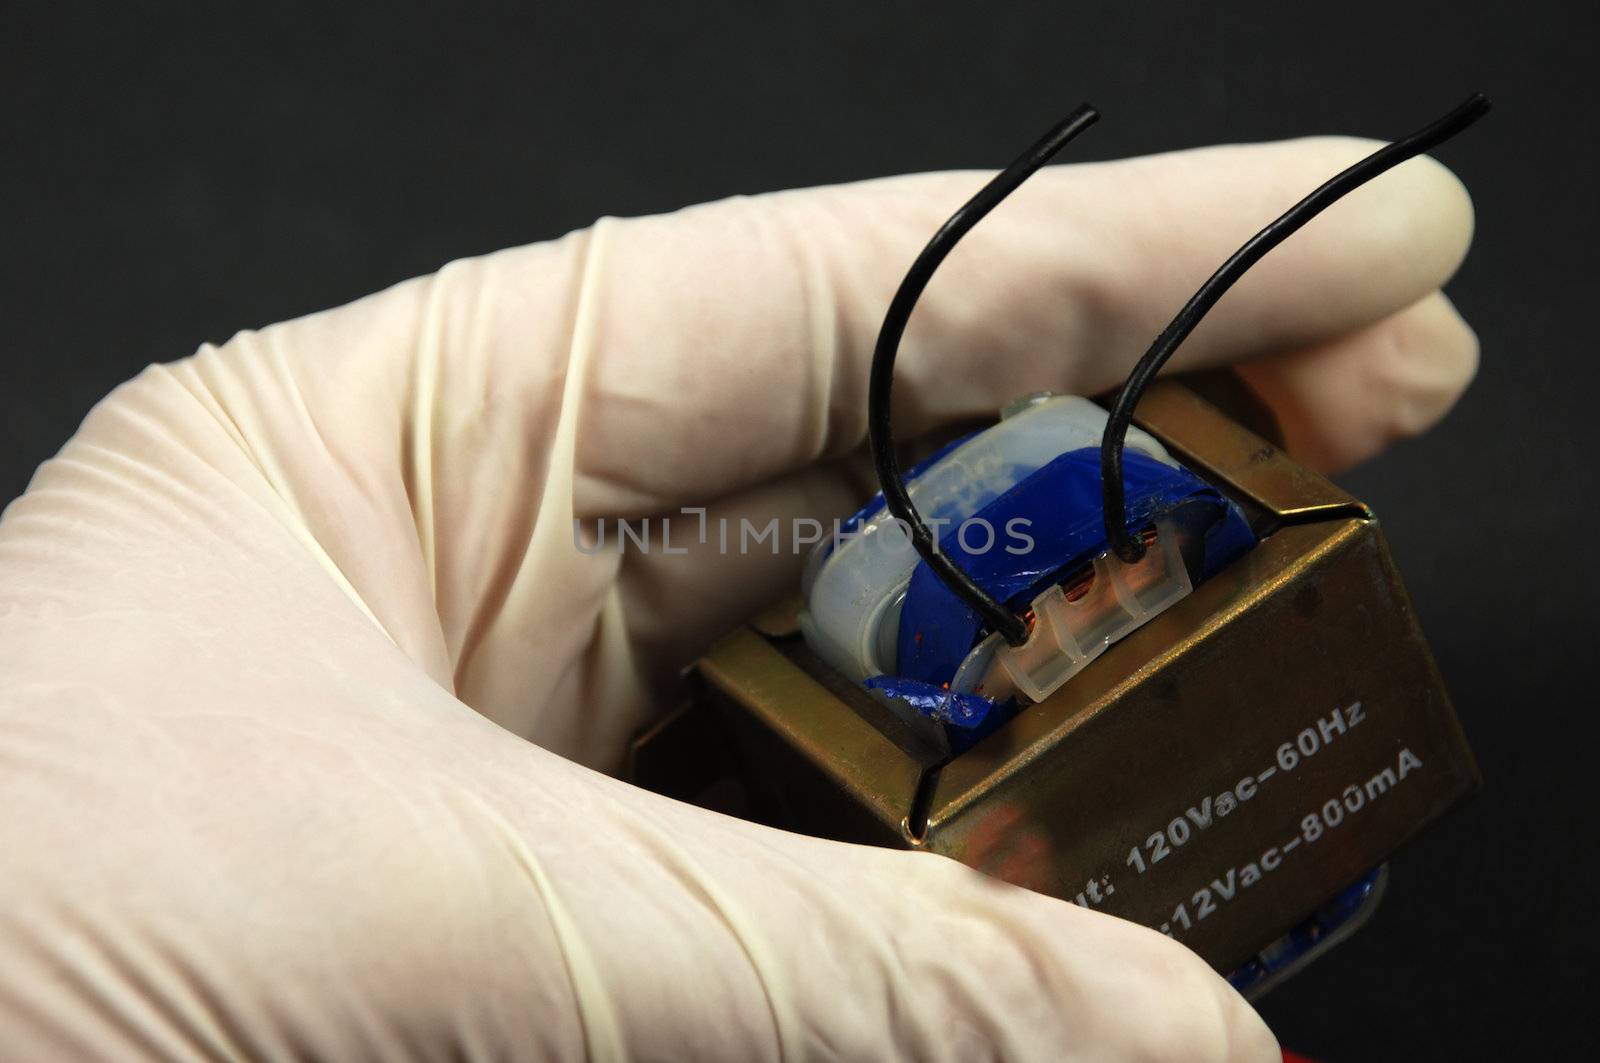 small transformer used for voltage change in household electronic products